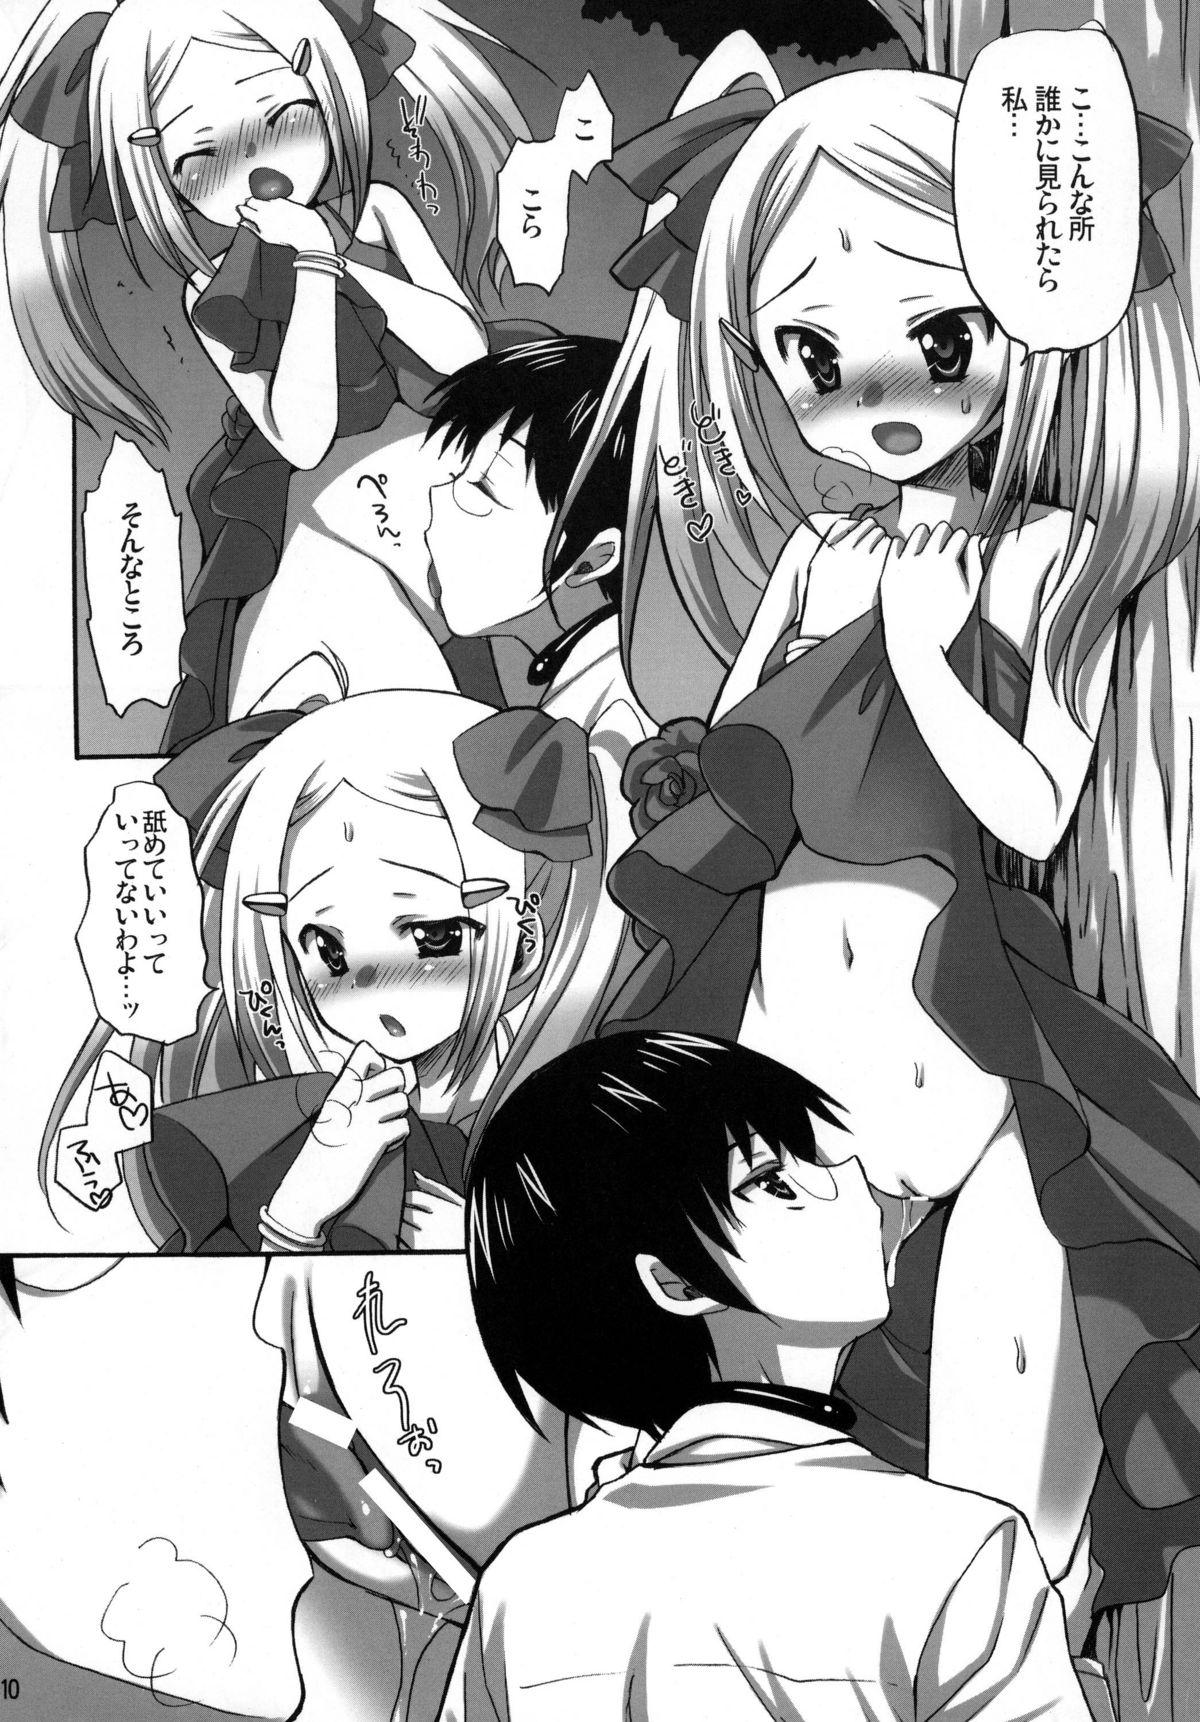 Suck Kami Nomi zo Fullcomp - The world god only knows Celebrity Nudes - Page 10